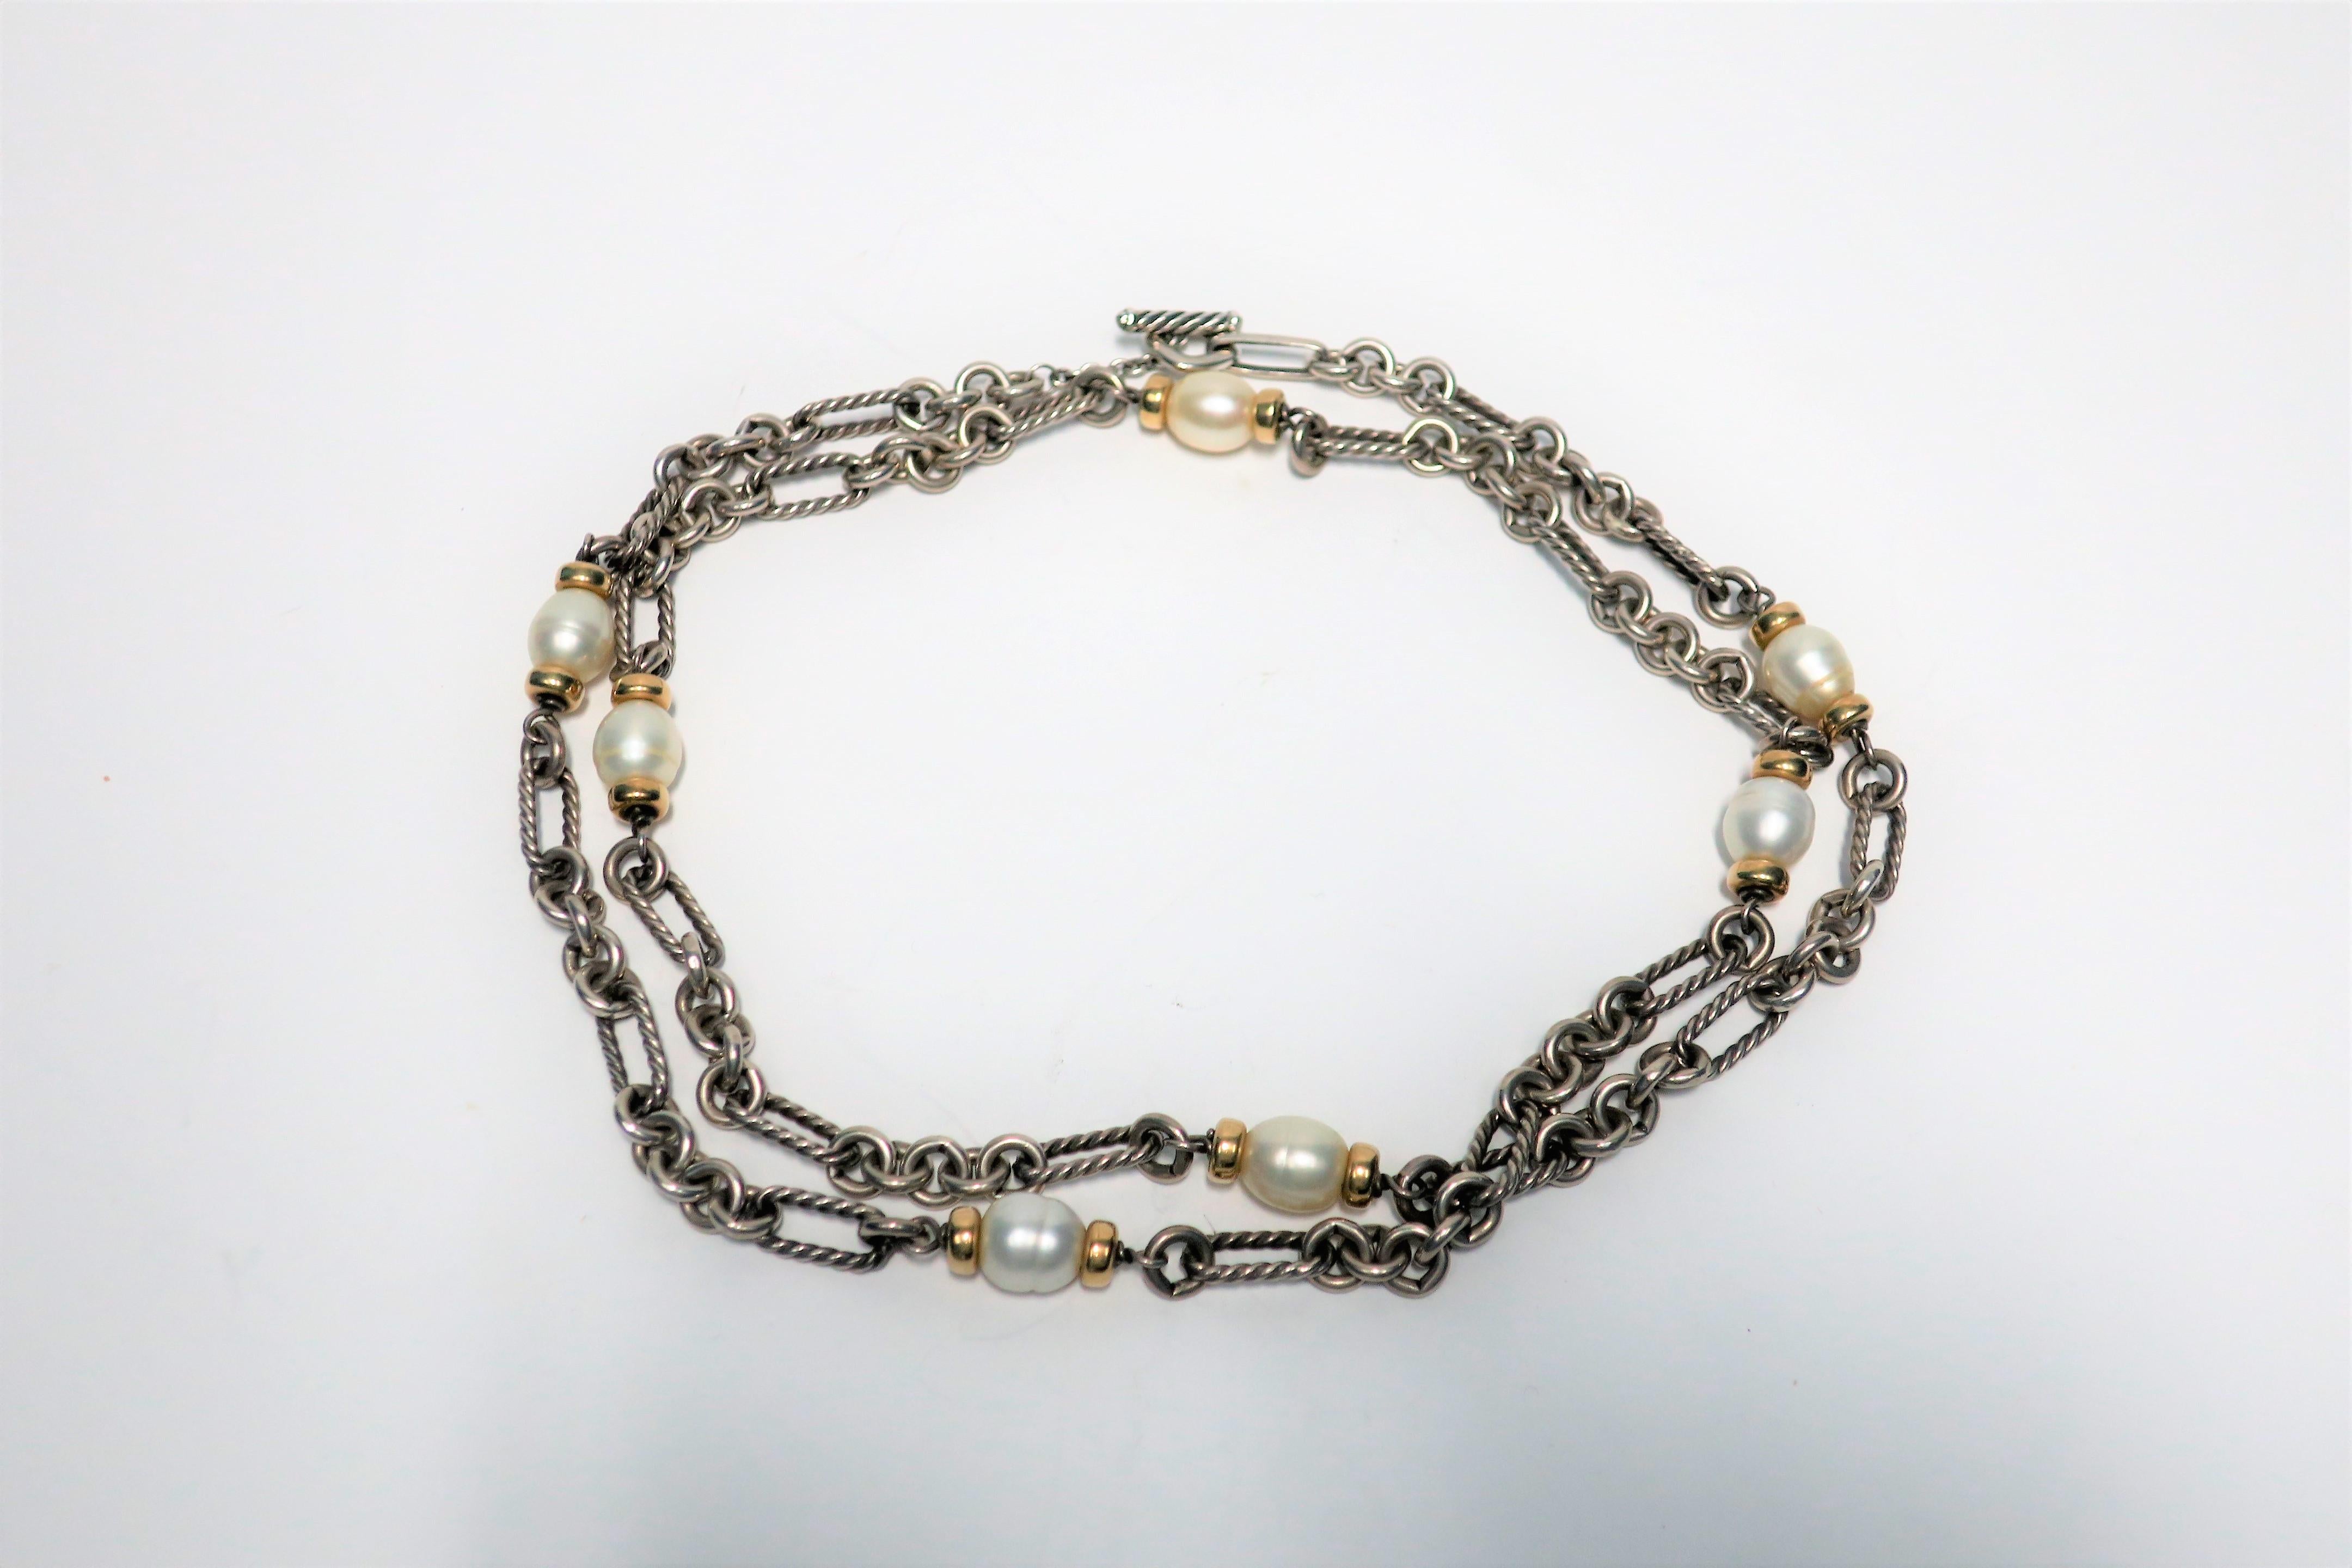 A beautiful and substantial vintage David Yurman 'Figaro' necklace, circa early-21st century, around 2002. Necklace is comprised of substantial sterling silver links and large freshwater pearls embraced by 18-karat yellow gold accent beads, with